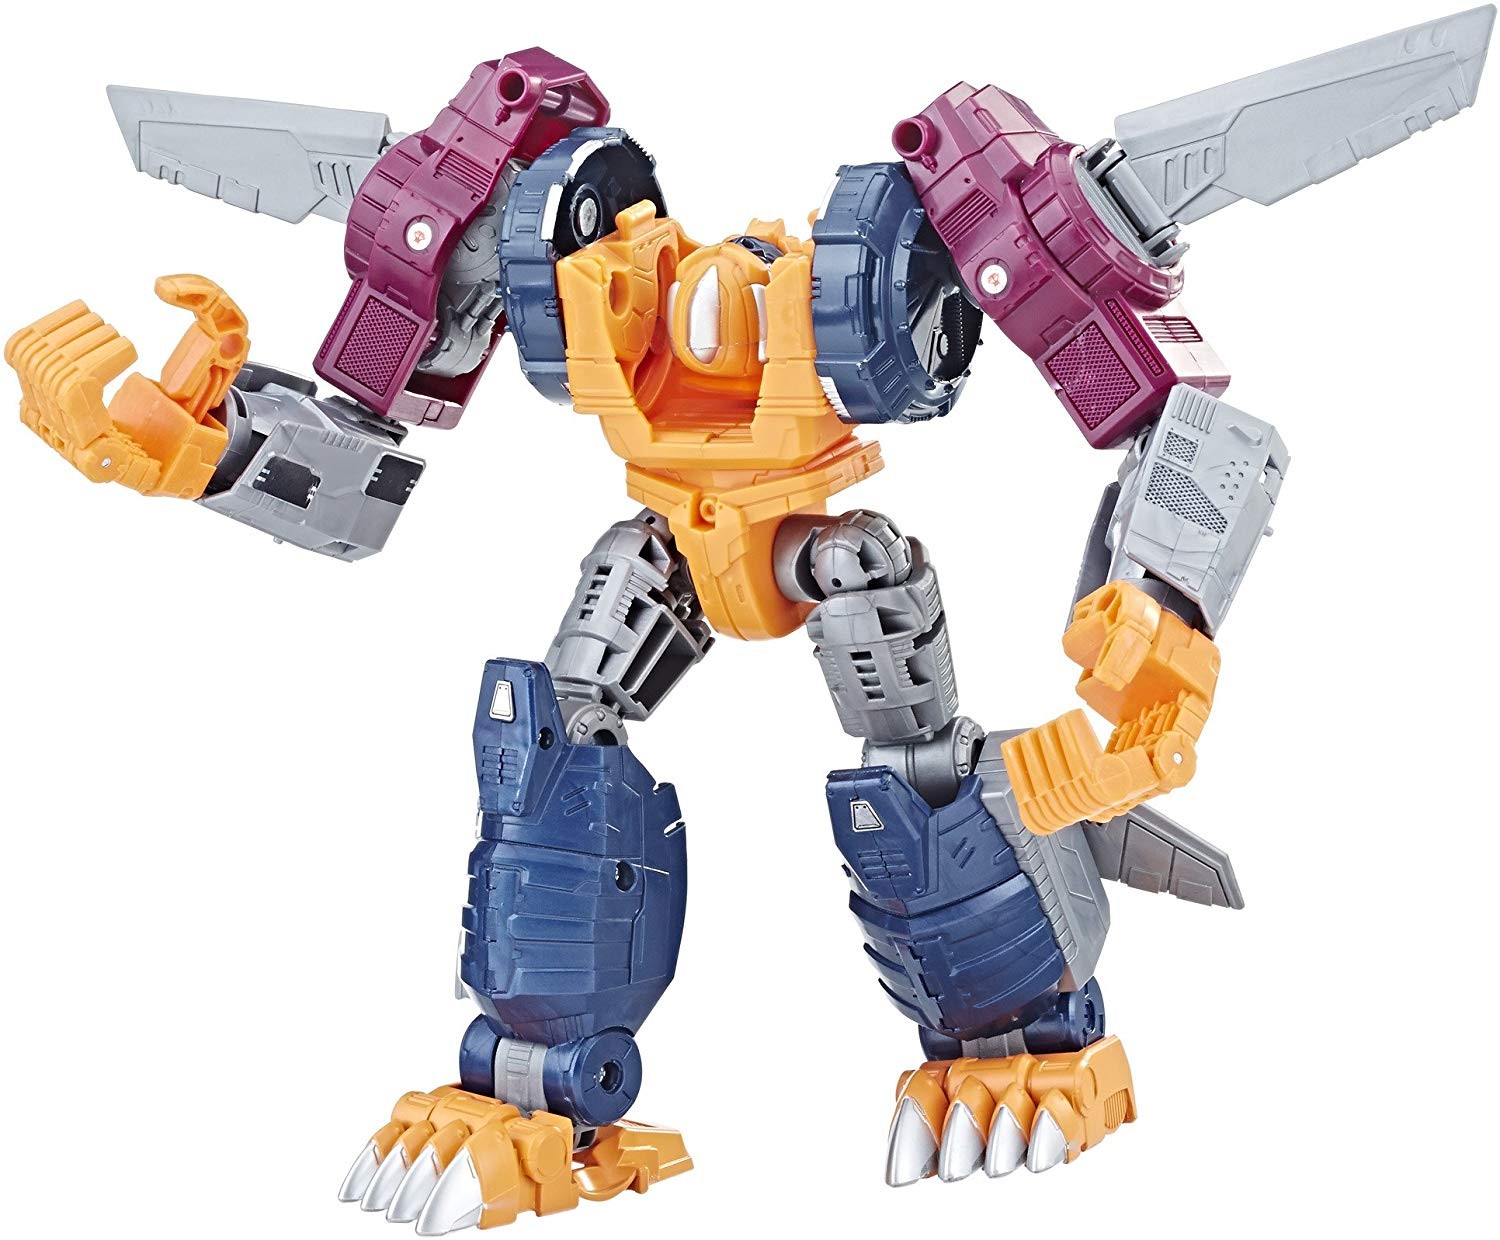 Transformers News: Transformers Power of the Primes Optimal Optimus now in stock at Hasbro Toy Shop and at Amazon.com